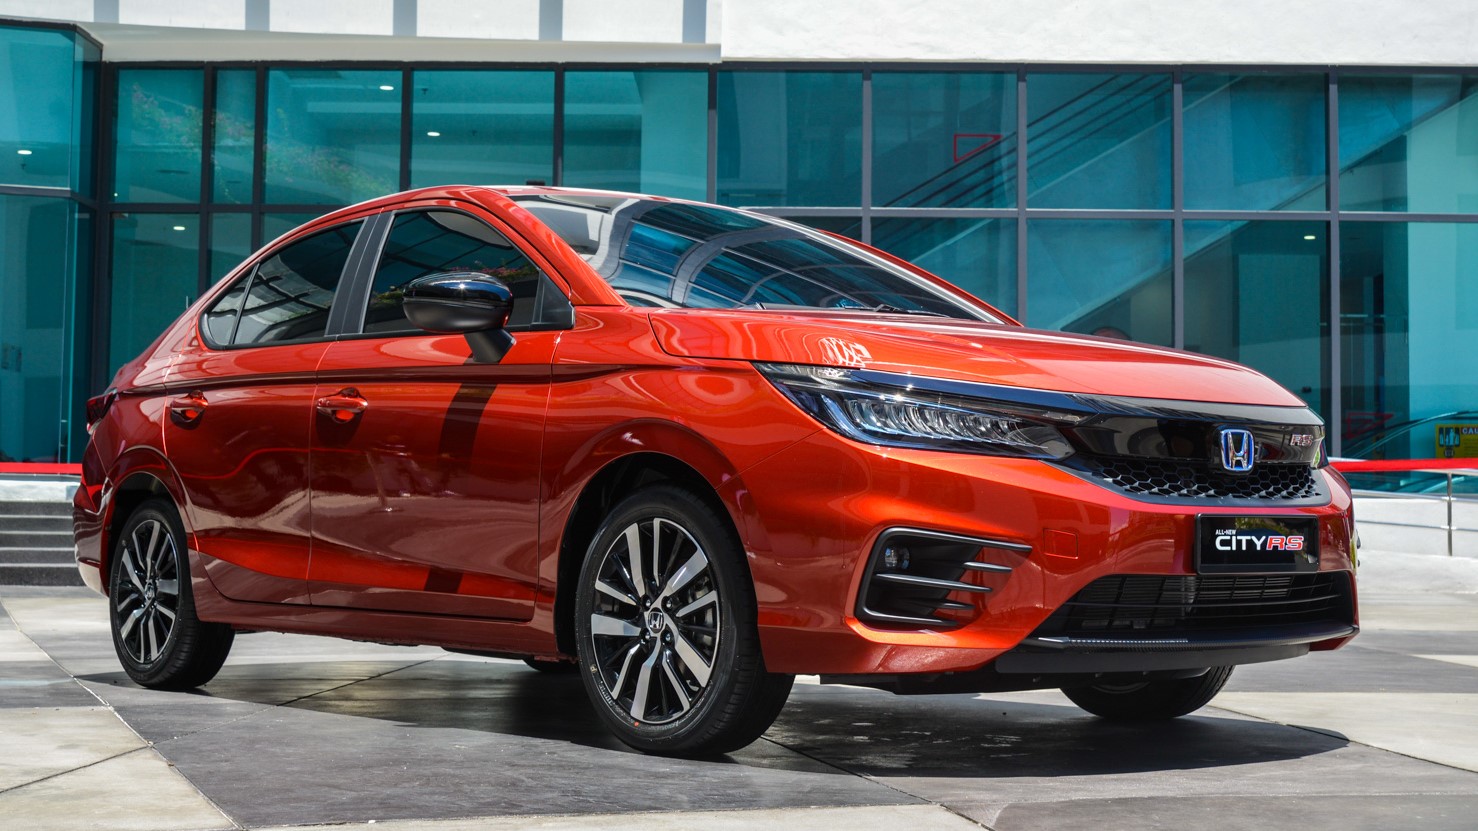 Confirmed: the 2021 Honda City RS costs more than a Proton X50 Flagship